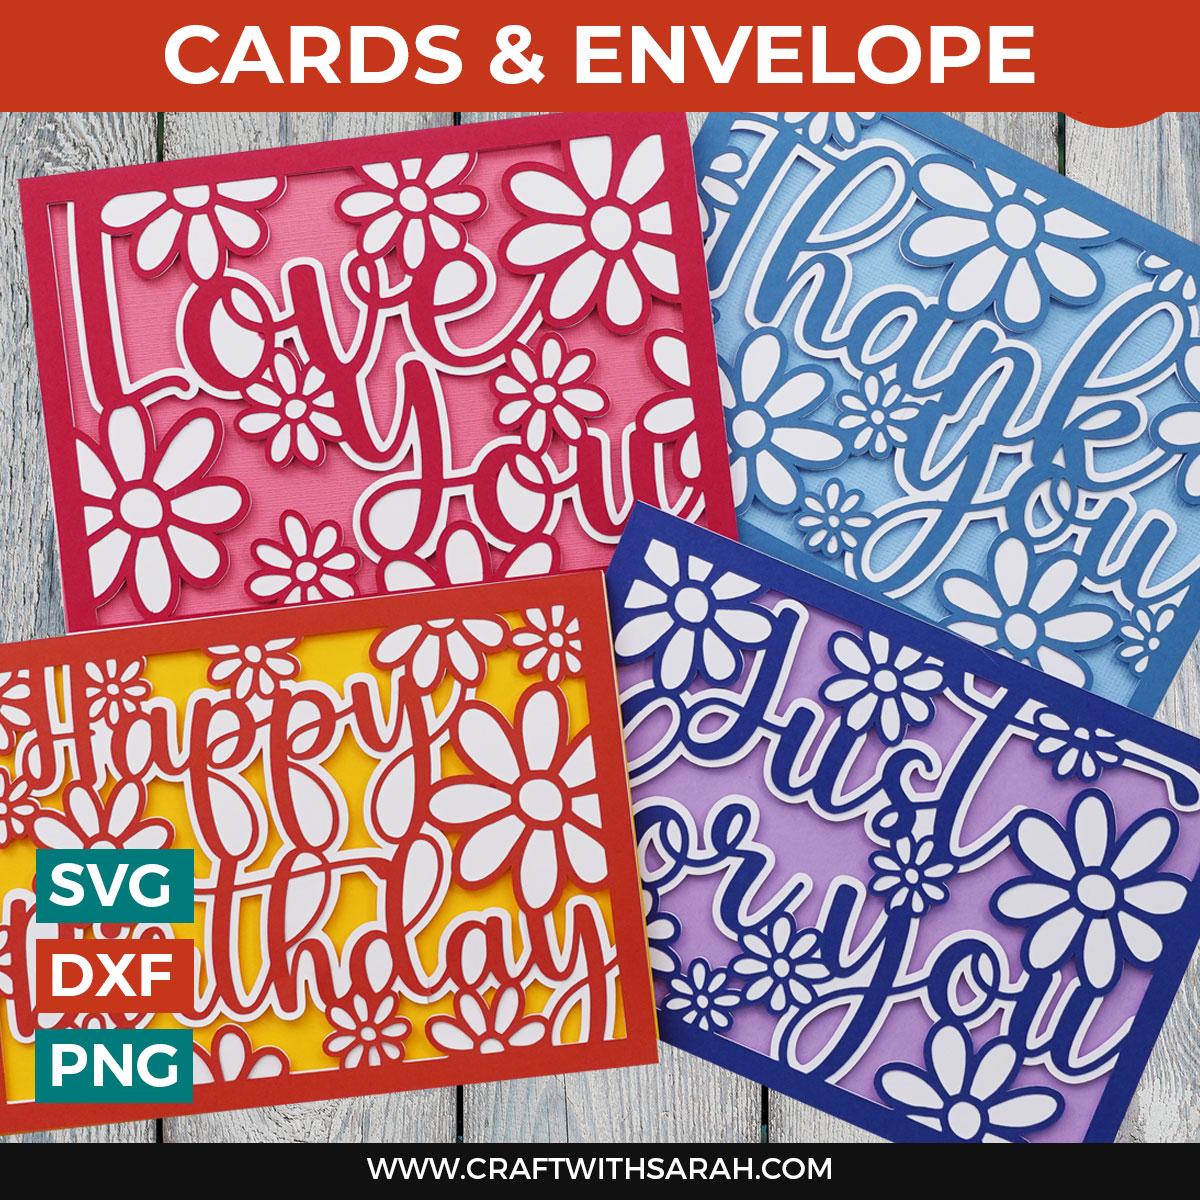 How to Make 3D Layered Greetings Cards with your Cricut